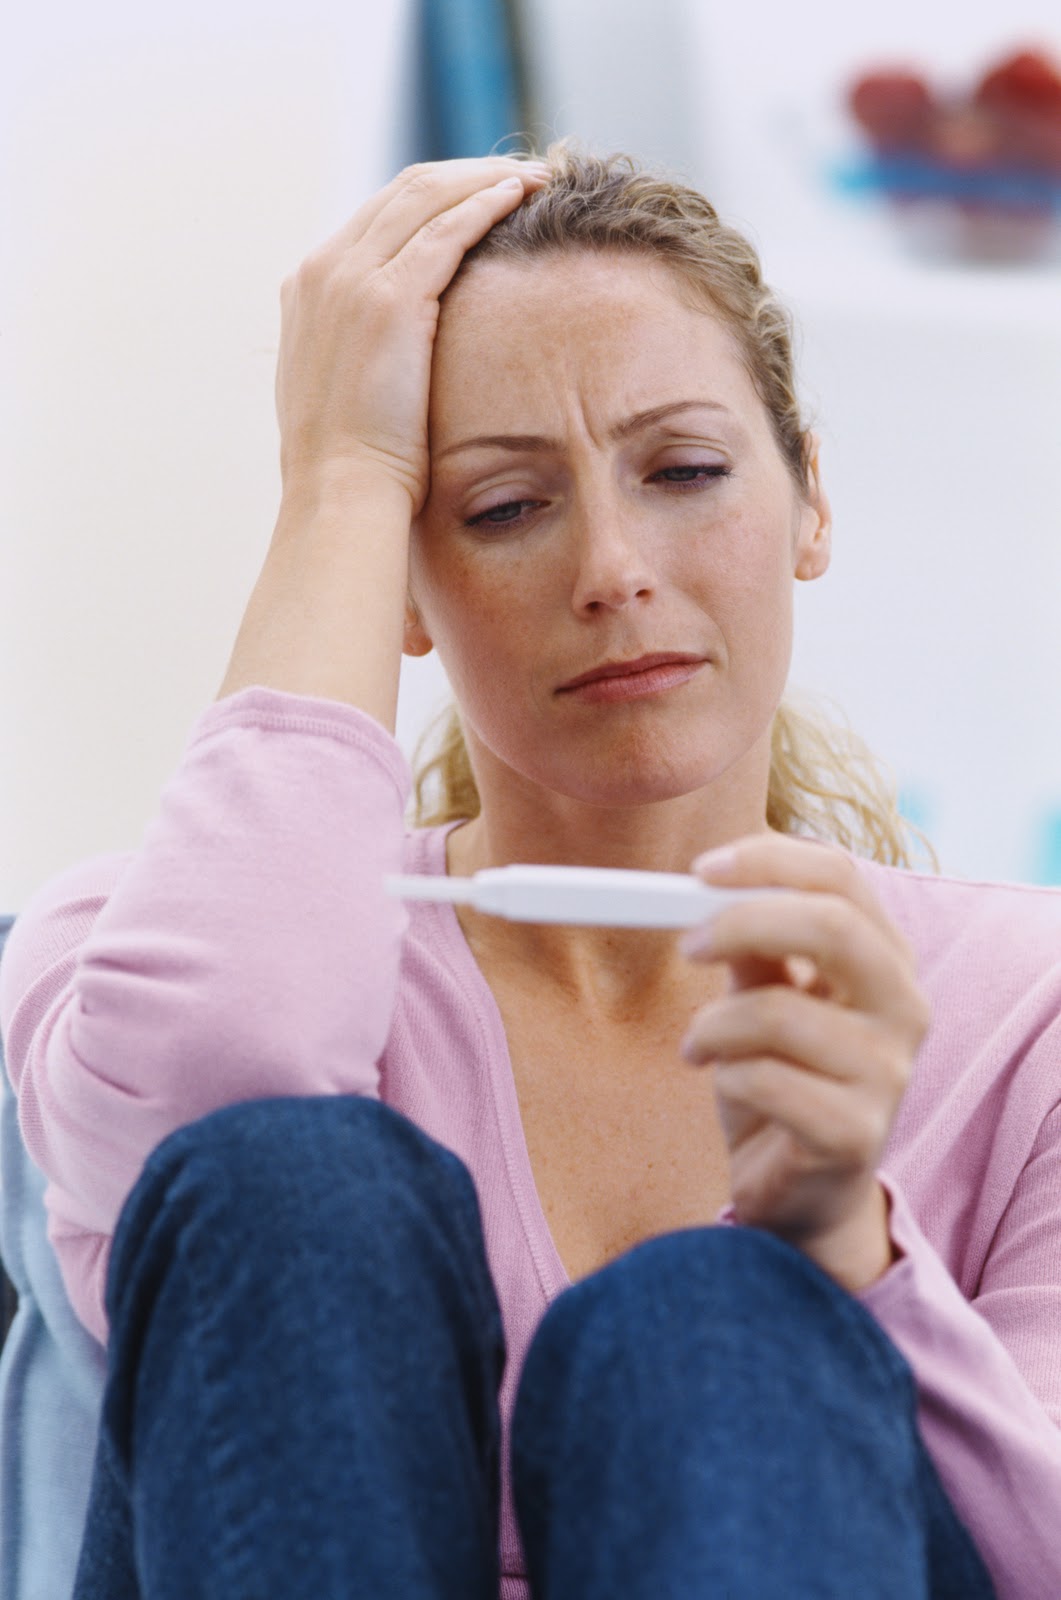 Unplanned Pregnancy Am I Pregnant? Early Pregnancy Signs and Symptoms